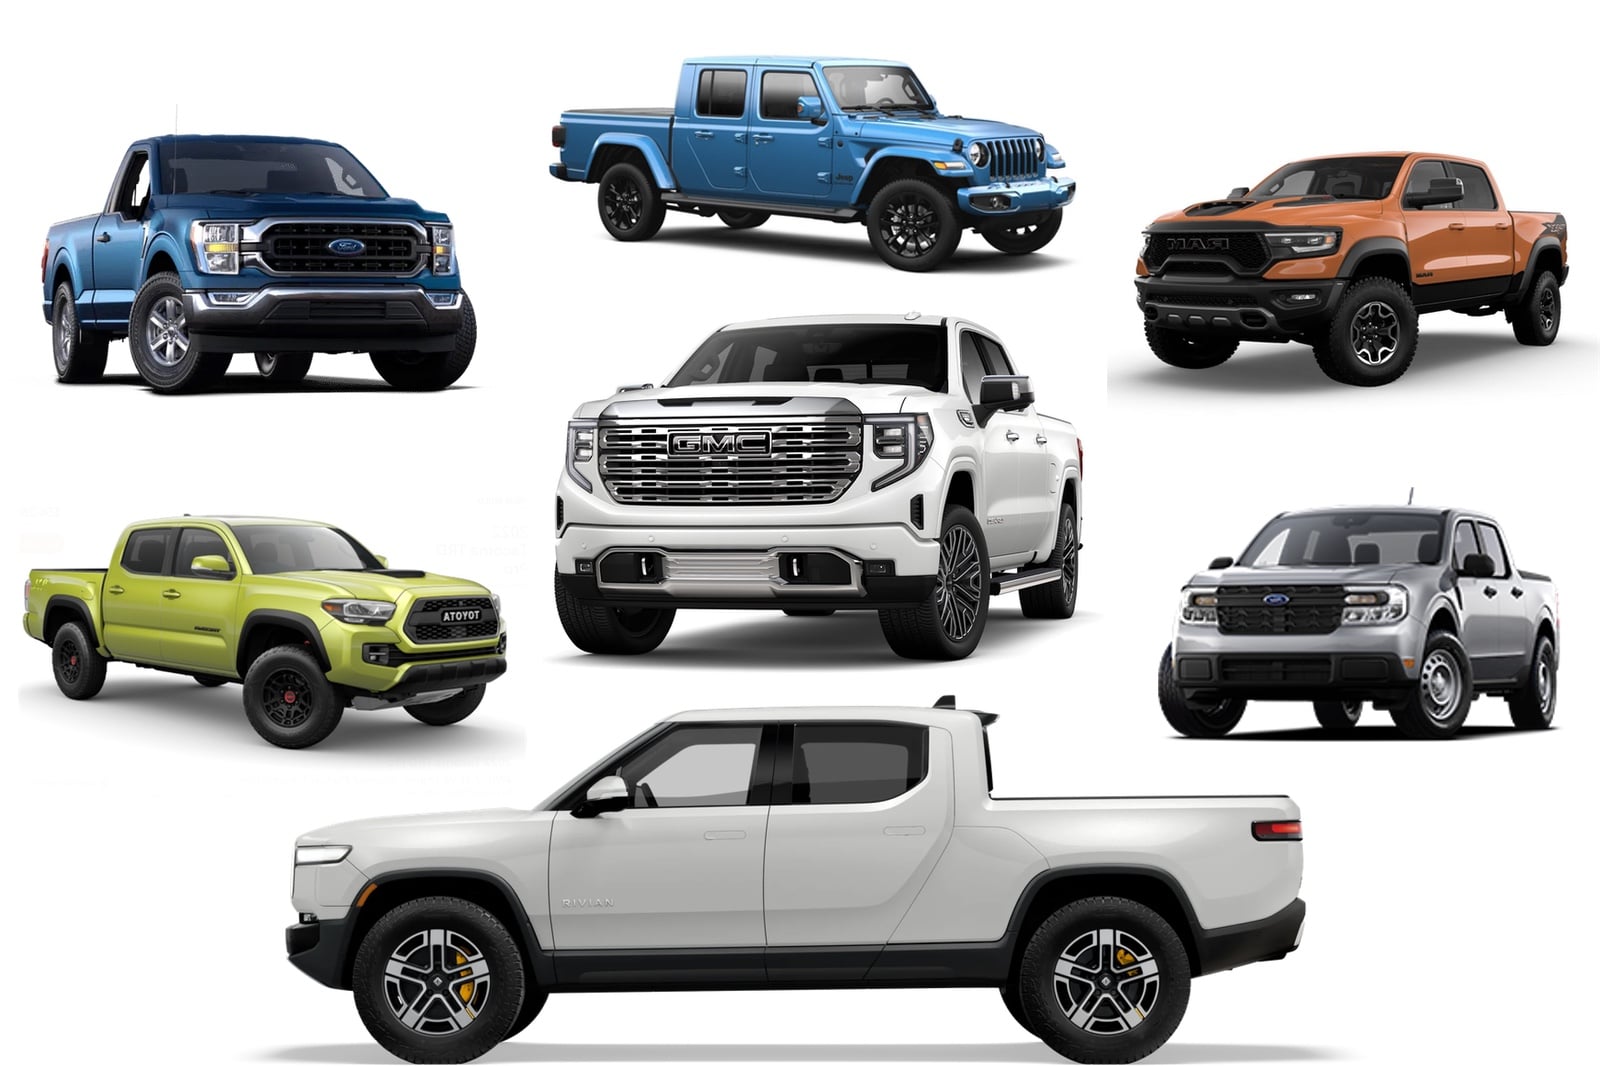 8 Of Your Favorite Trucks Optioned To The Max - The 2022 Edition